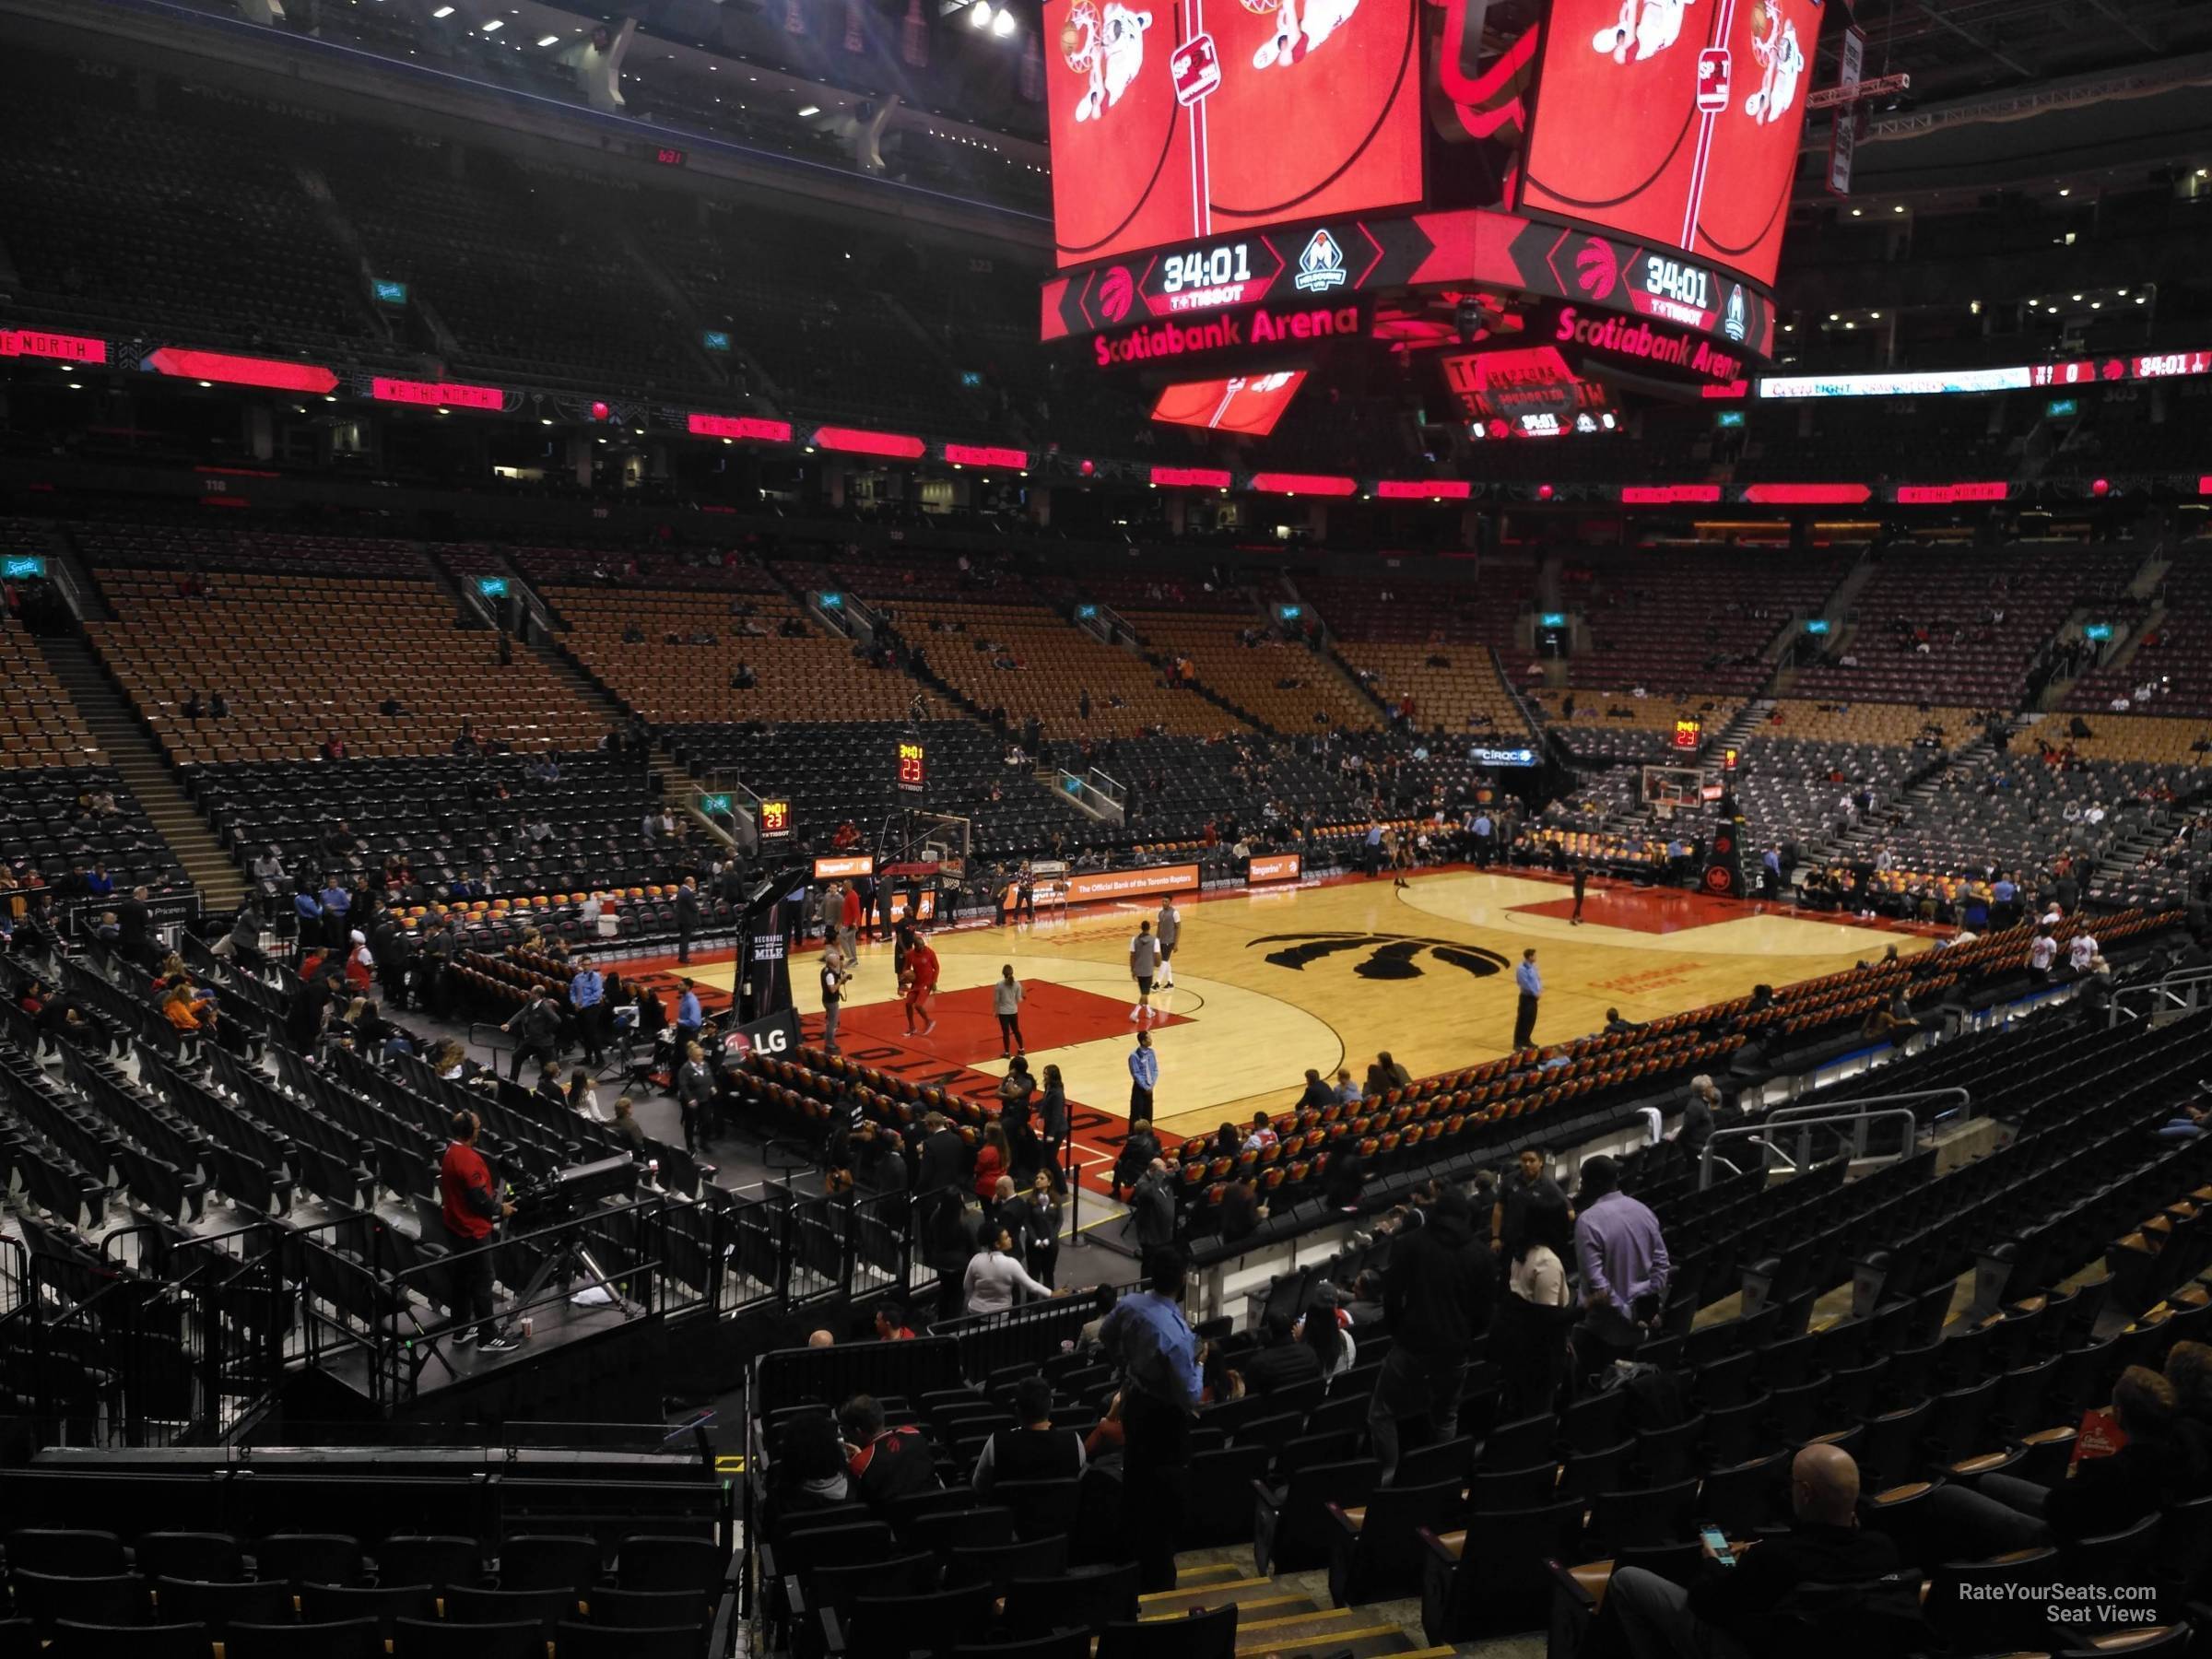 section 111, row 28 seat view  for basketball - scotiabank arena